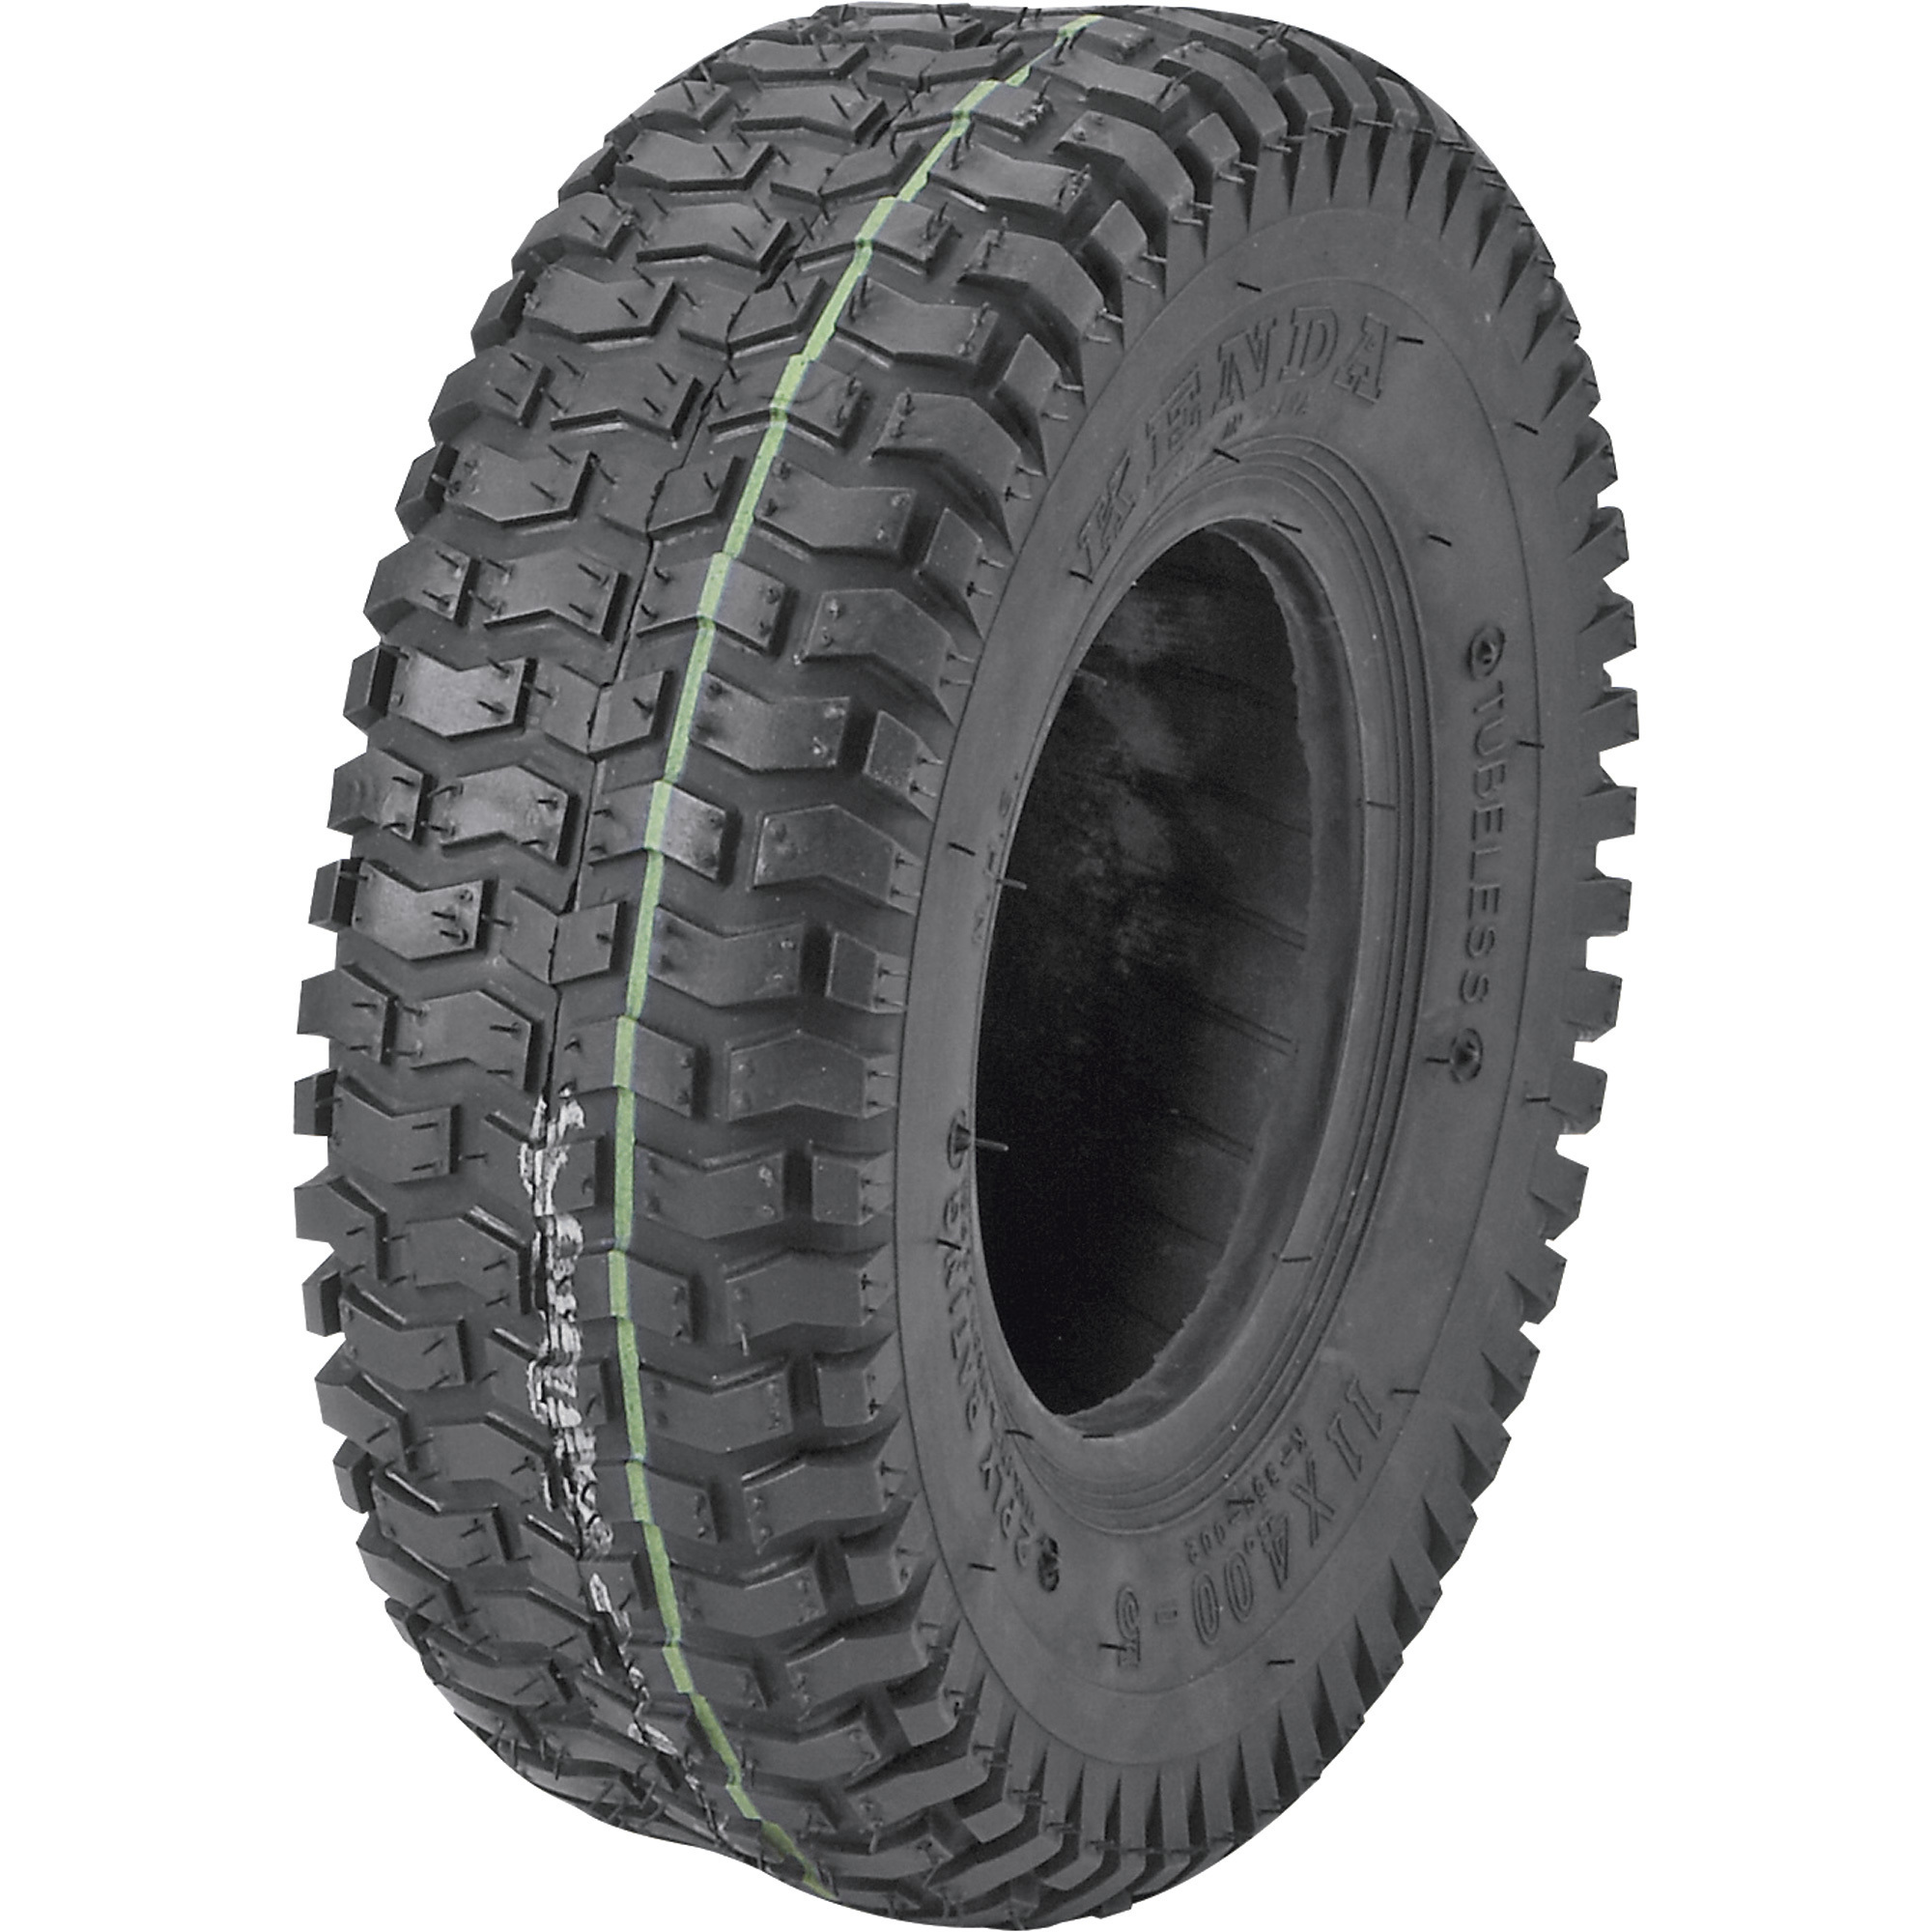 Kenda Lawn and Garden Tractor Tubeless Replacement Turf Tire â 11 x 400-5